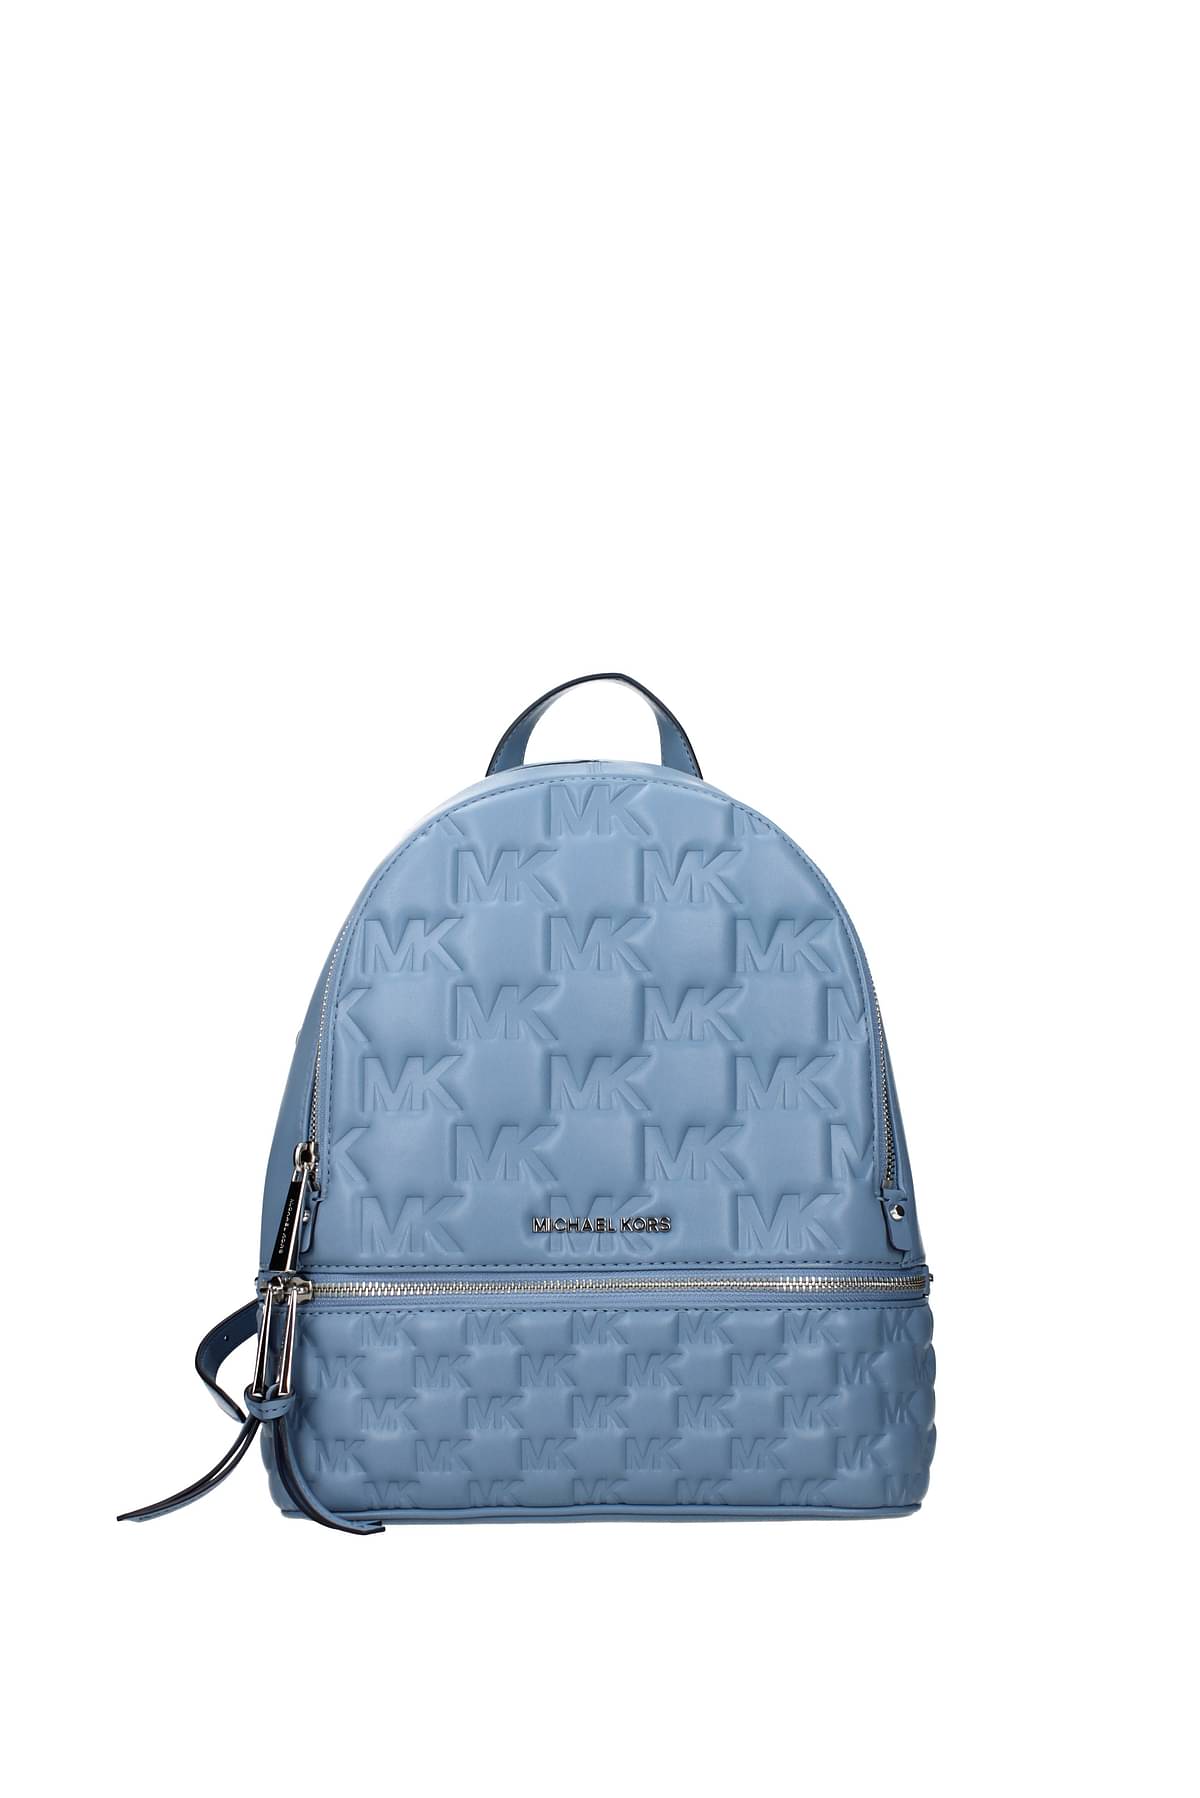 Michael Kors Backpacks and bumbags rhea md Women 30S2SEZB2LCHAMBRAY Leather  193,55€